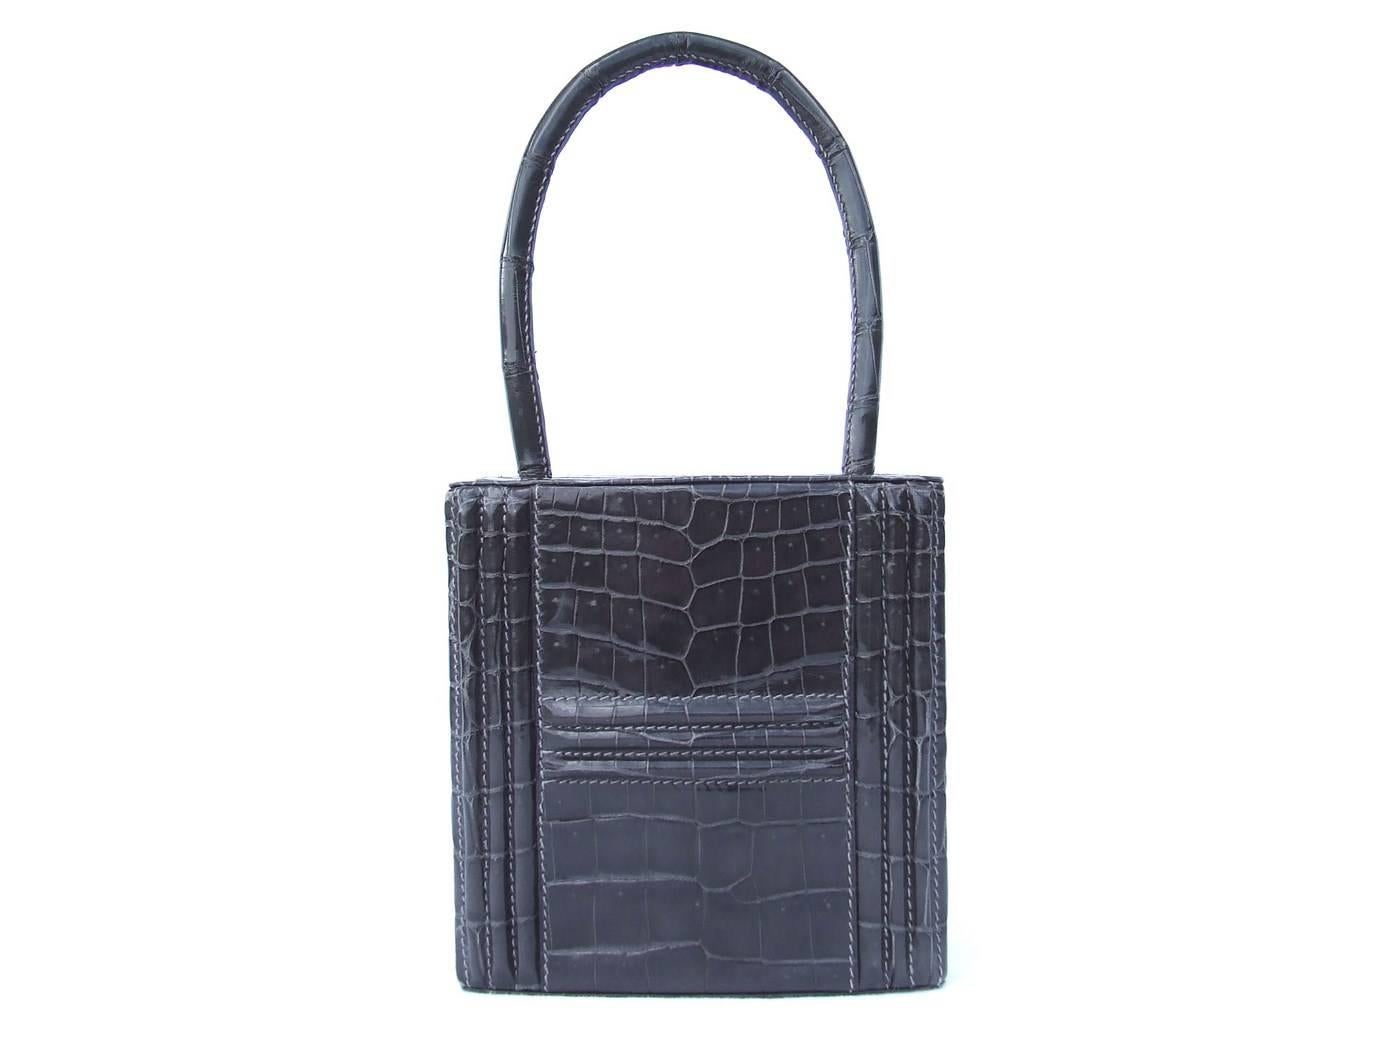 BEAUTIFUL AUTHENTIC HERMES BAG

In Shape of Hermes Padlock

RARE, impossible to find !

Made in France

Made of Crocodile Niloticus, silver-Tone hardware
 
Colorway: Grey

Lined with smooth black leather

Stamp: hard to see. In a square anyway

1